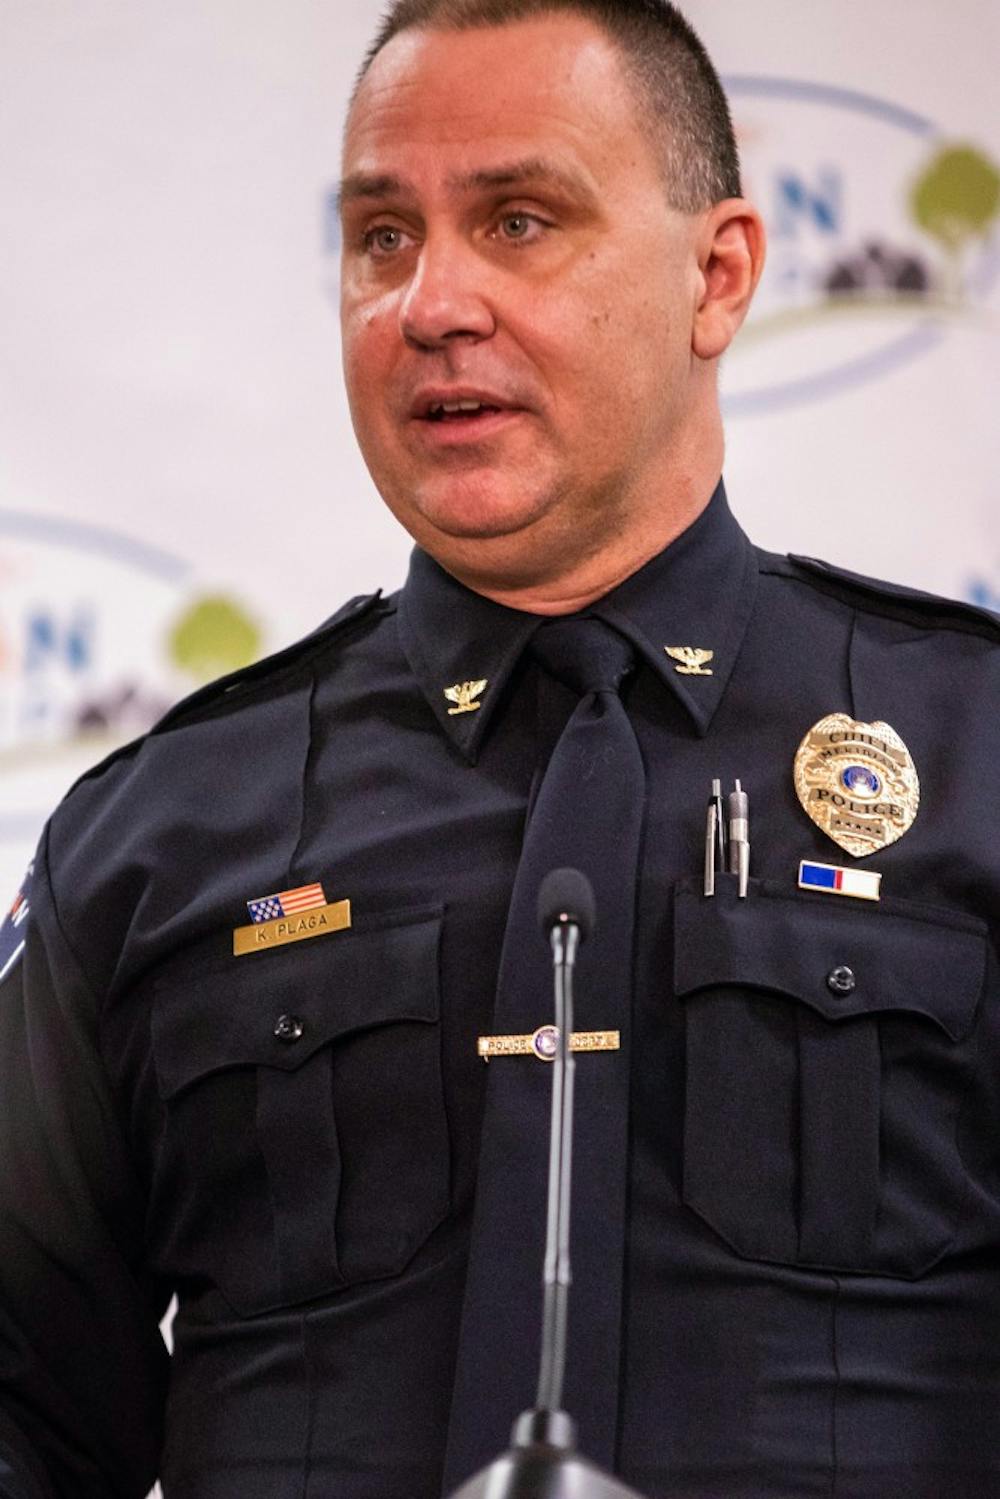 <p>Chief of Merdian Township Police Ken Plaga is pictured at the press conference about an investigation into the department&#x27;s handling of a report about Larry Nassar&#x27;s sexual abuse in 2004.</p>